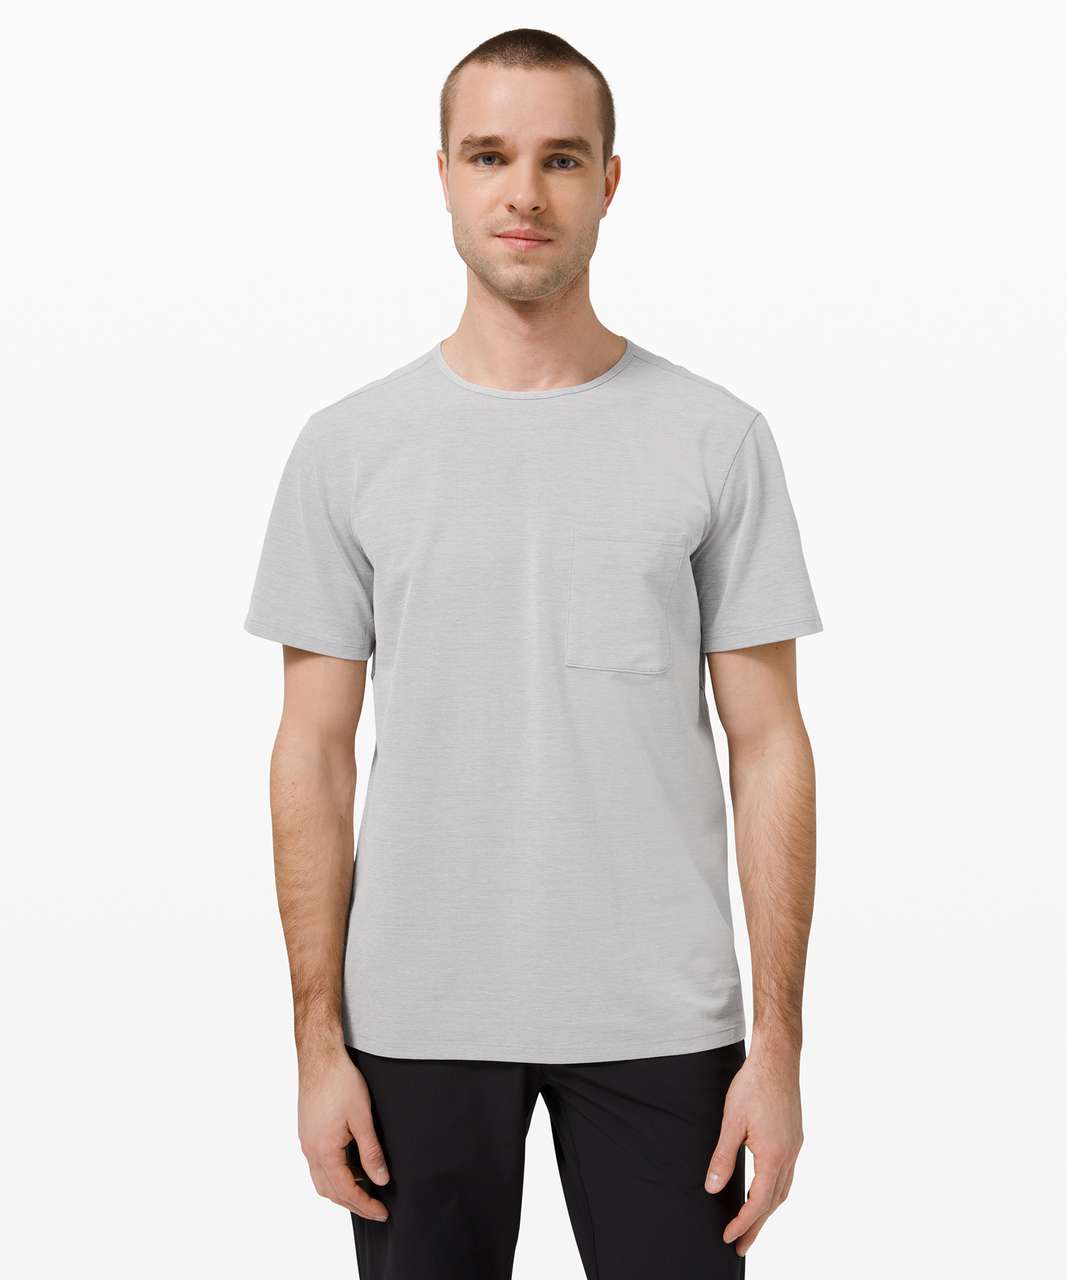 Lululemon Chest Pocket Relaxed Fit Tee *Oxford - Grey Sage / White